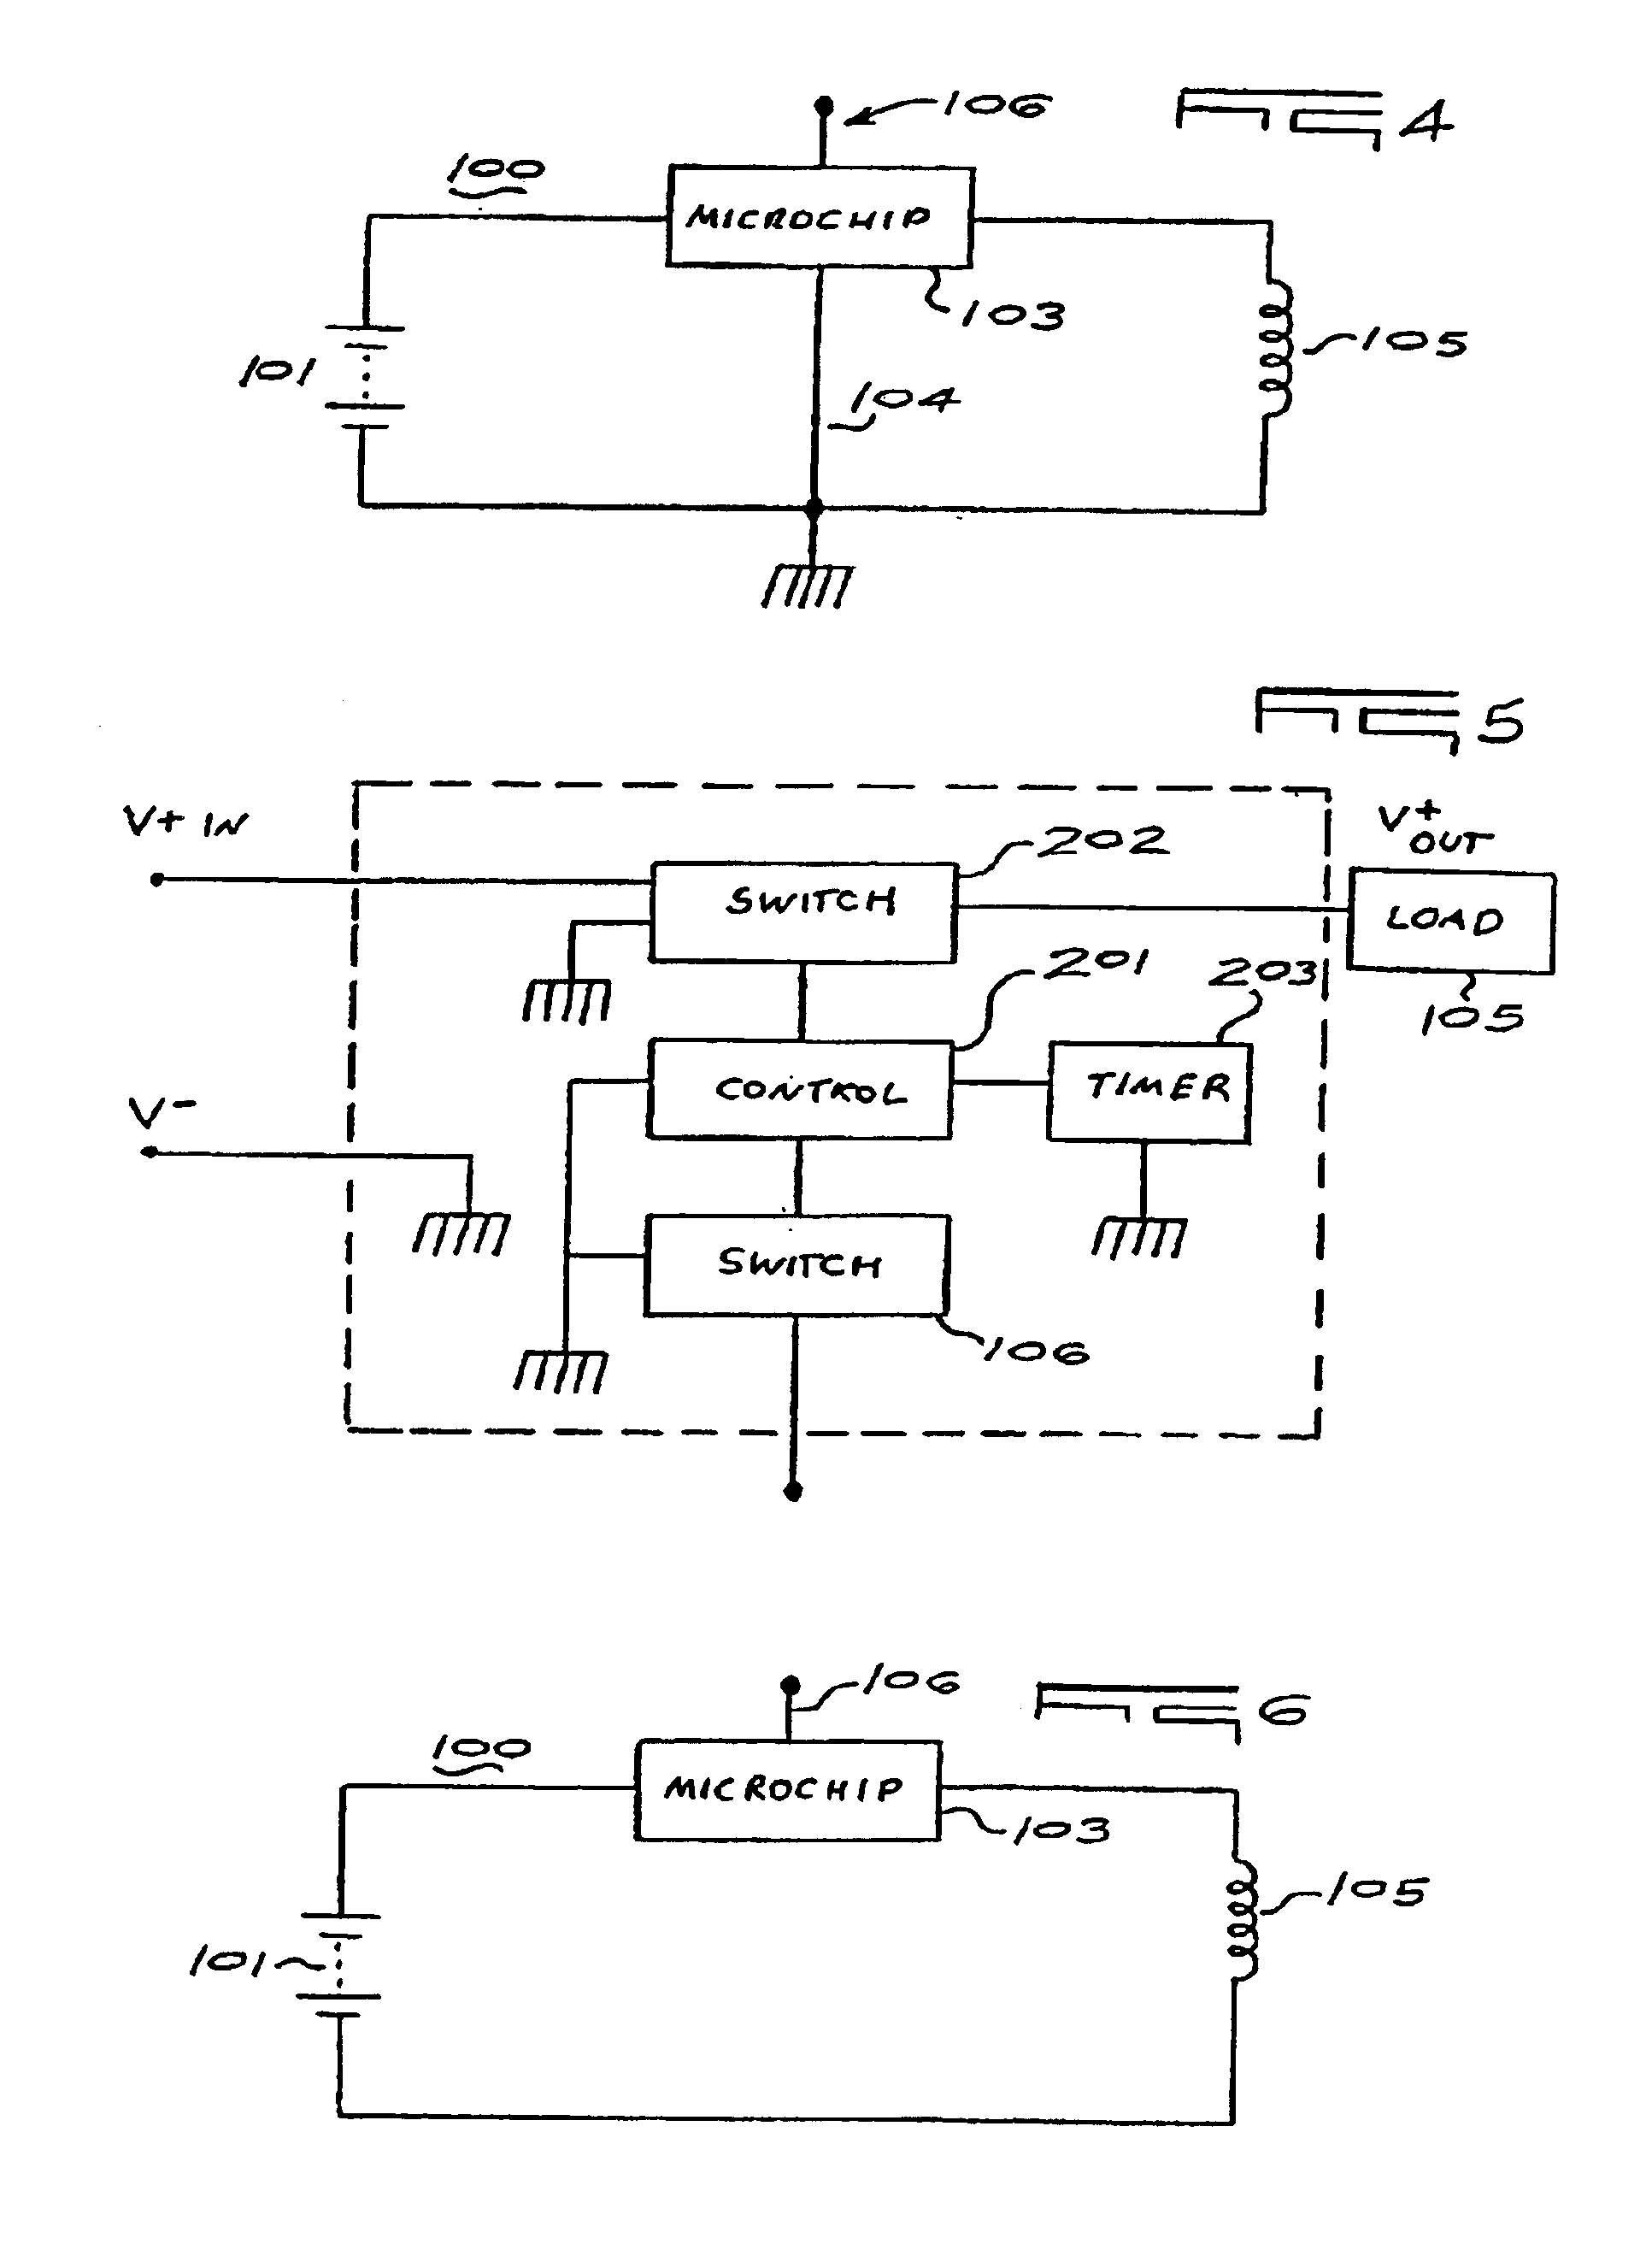 Intelligent electrical switching device